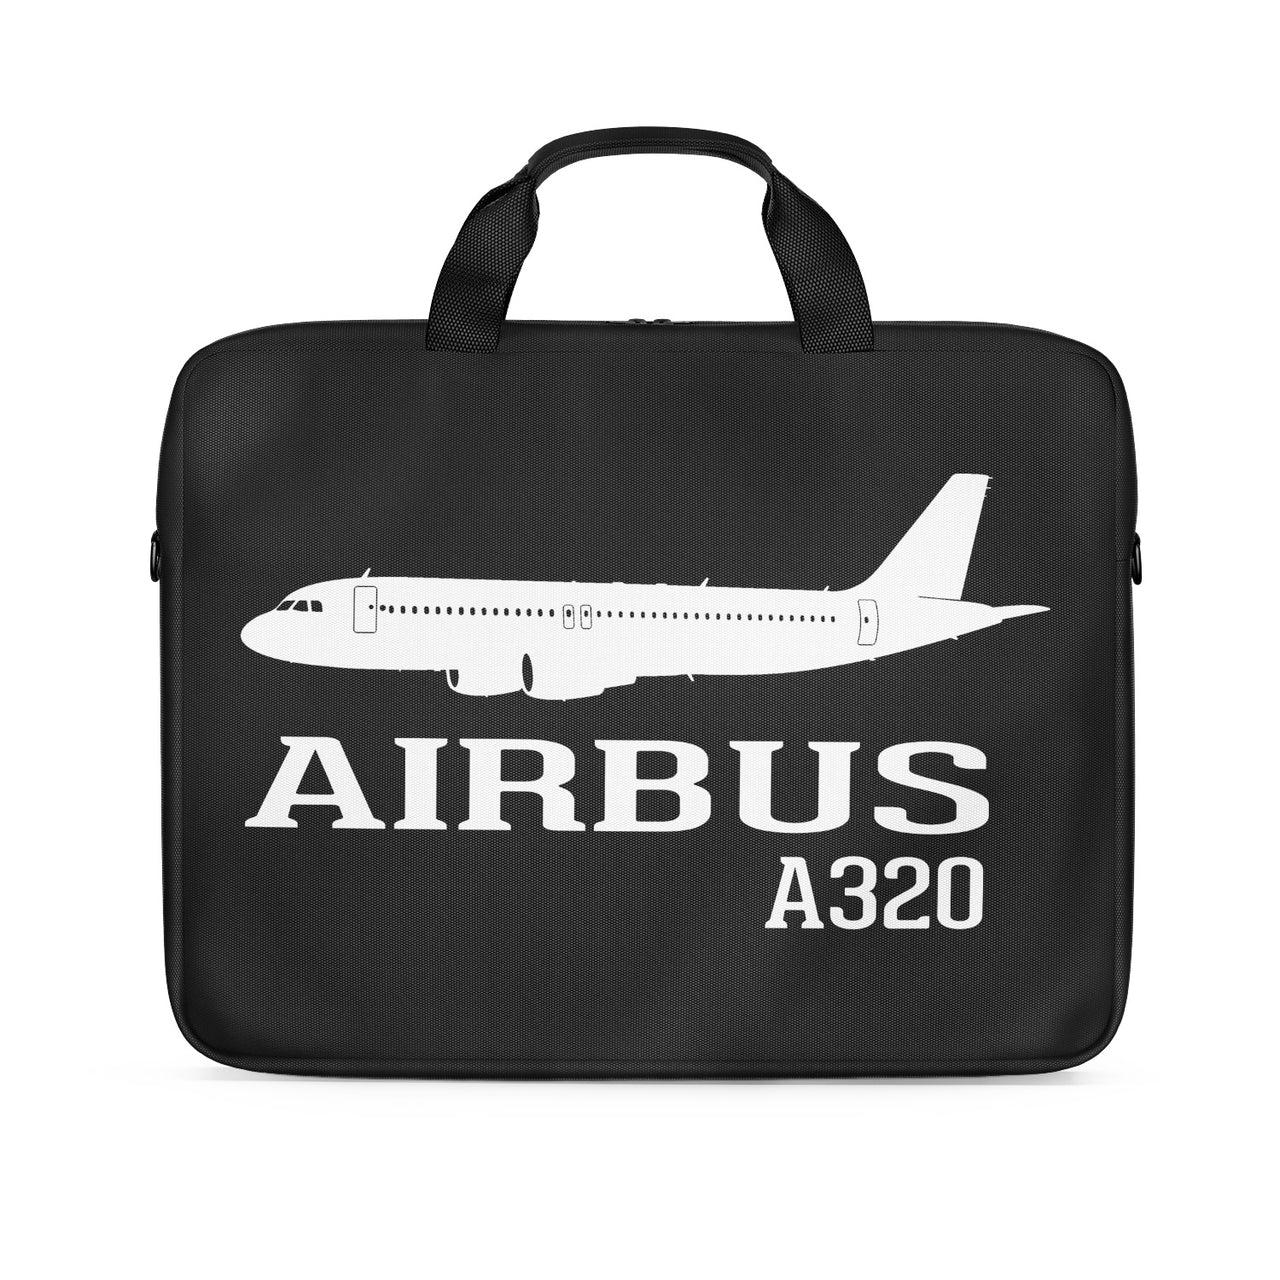 Airbus A320 Printed Designed Laptop & Tablet Bags